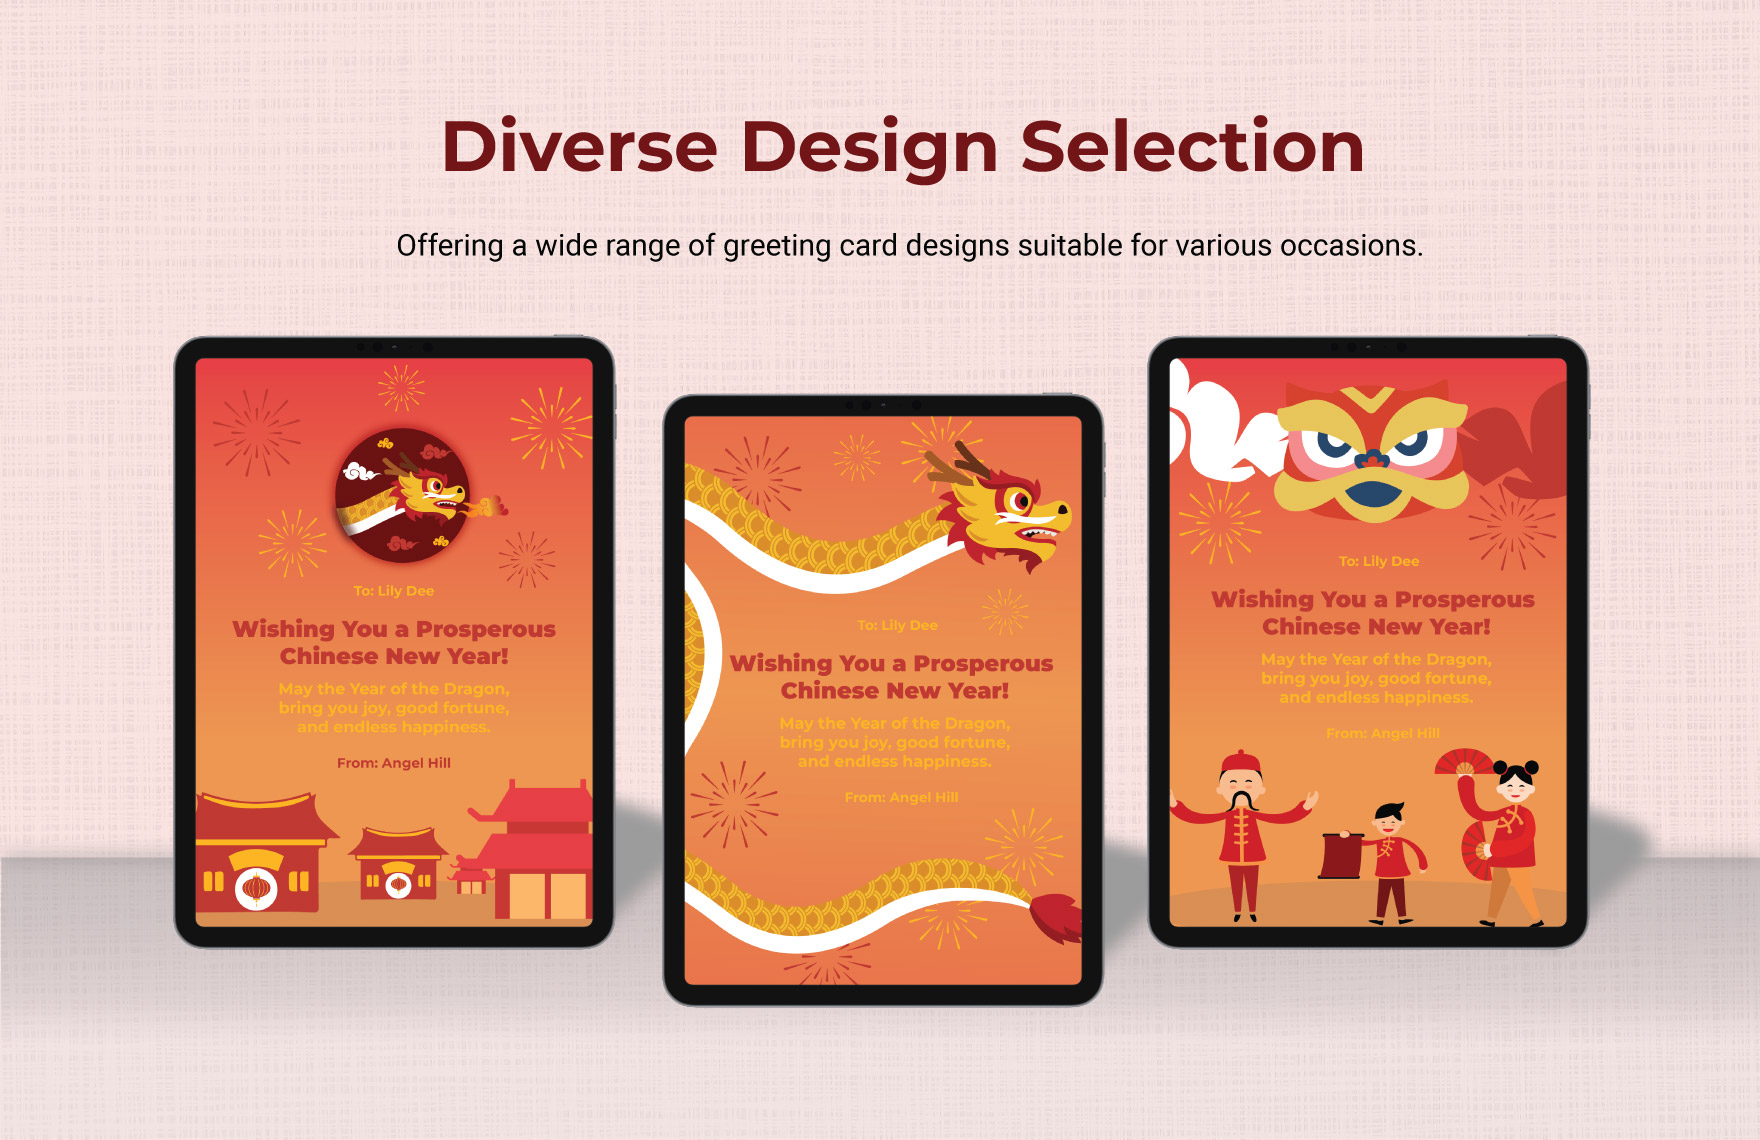 Chinese New Year Greeting Card Template